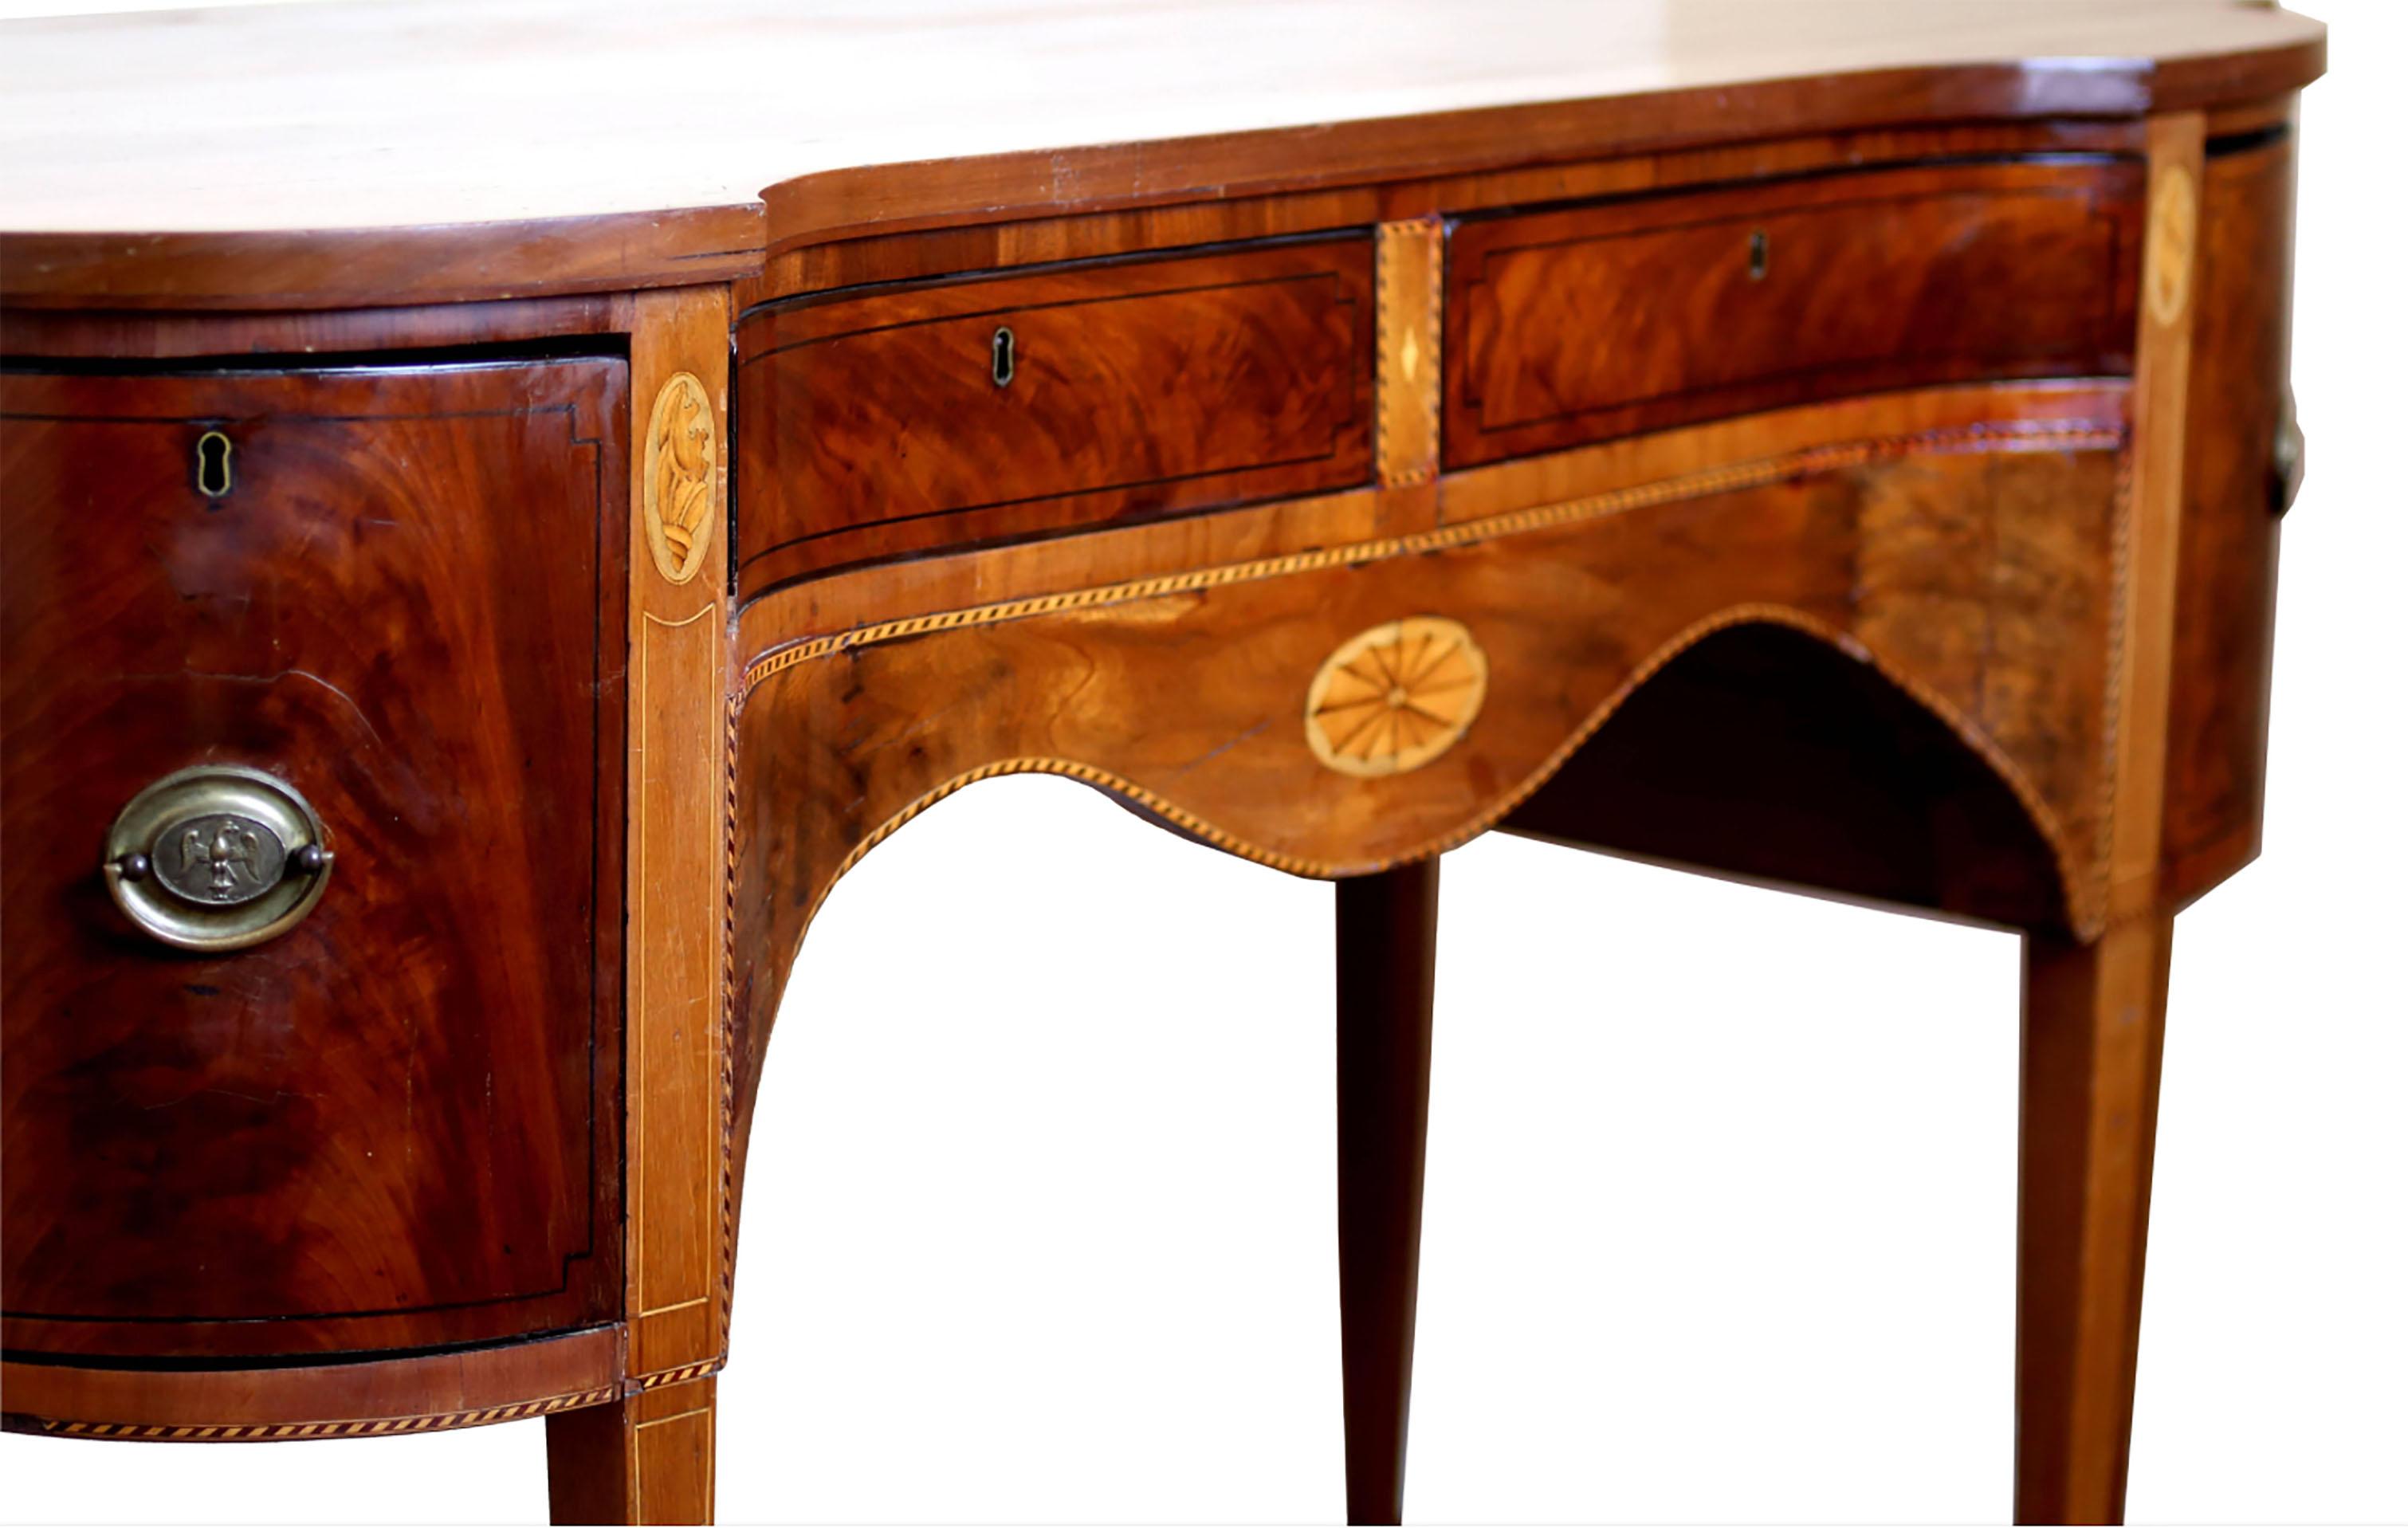 Striking sideboard buffet with concave center in mahogany, satinwood, holly, and ebony. Center section contains silver and linen drawers while outer deep drawers housed liquor and wine cooler. Banded inlay throughout with conch and central spider